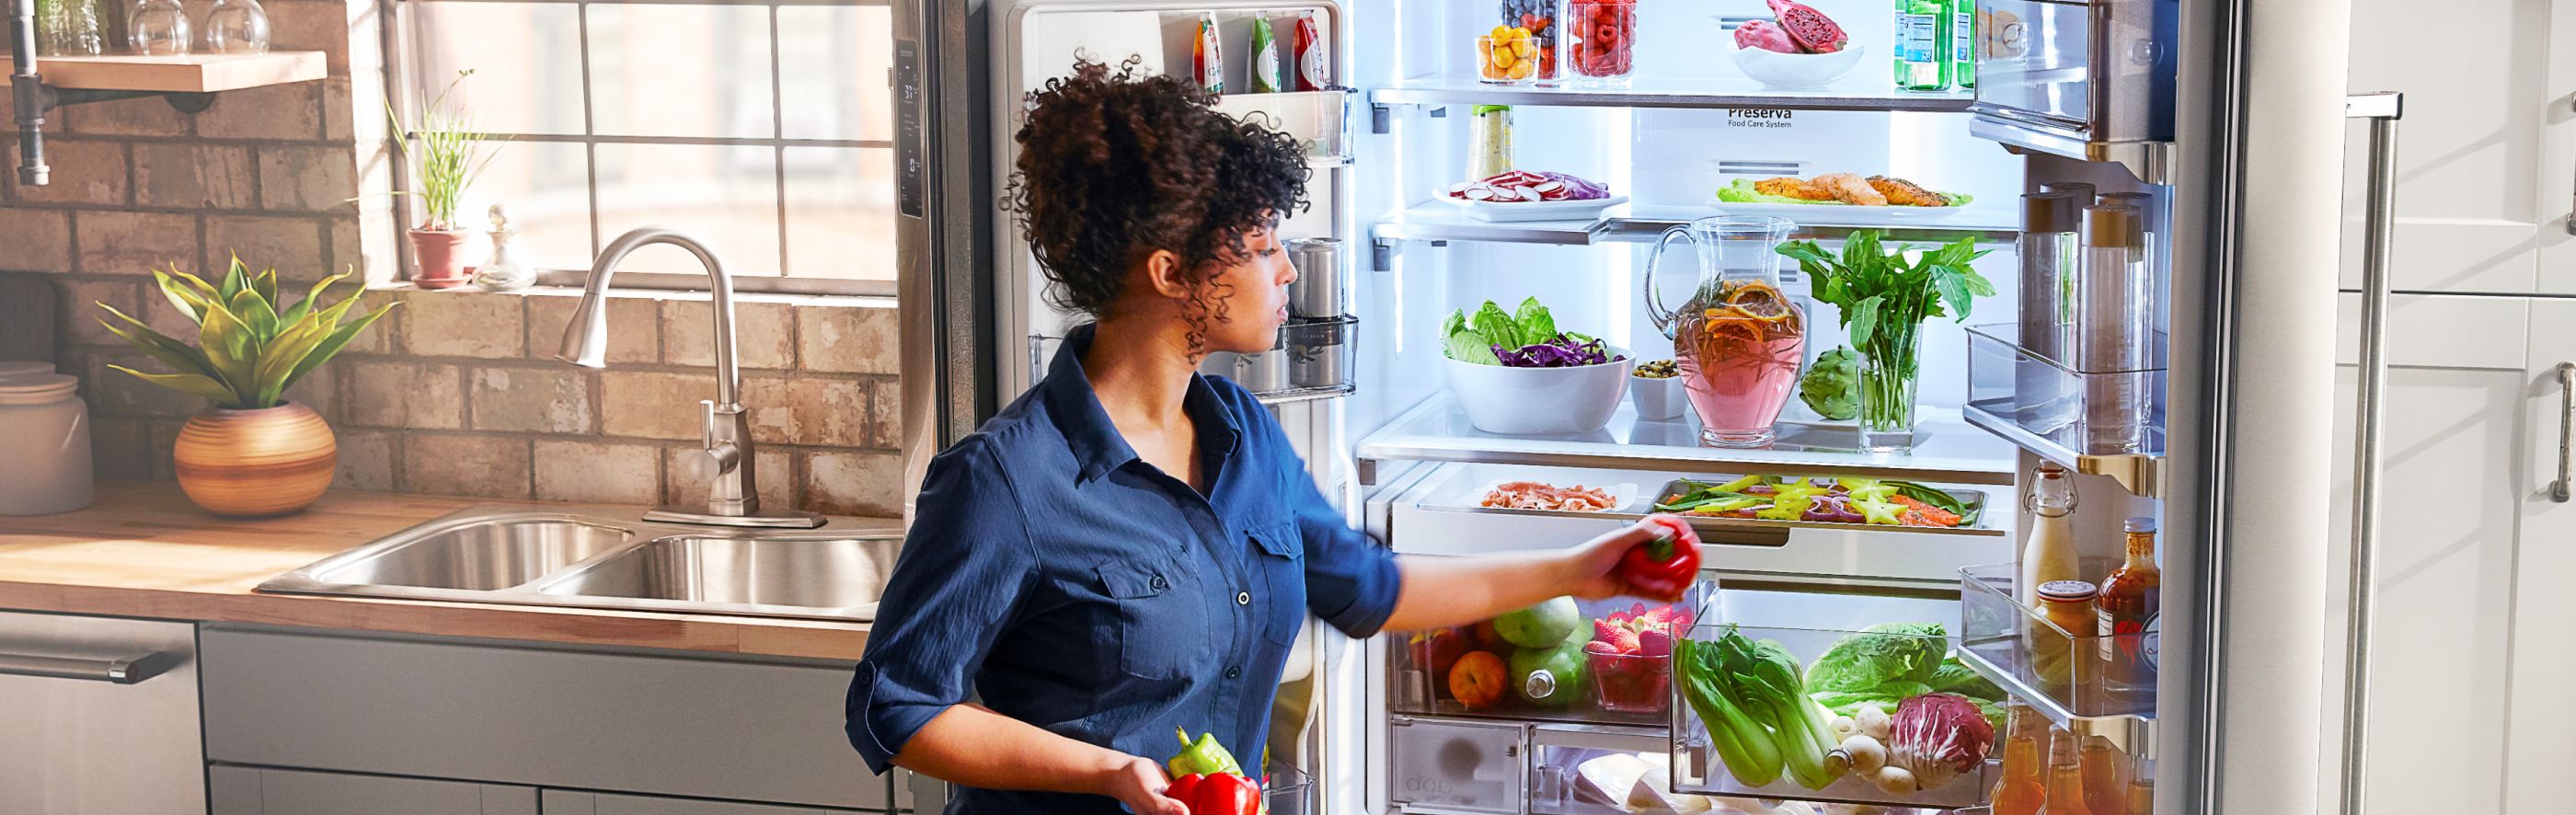 Refrigerator Buying Guide: How to Choose a Fridge | KitchenAid